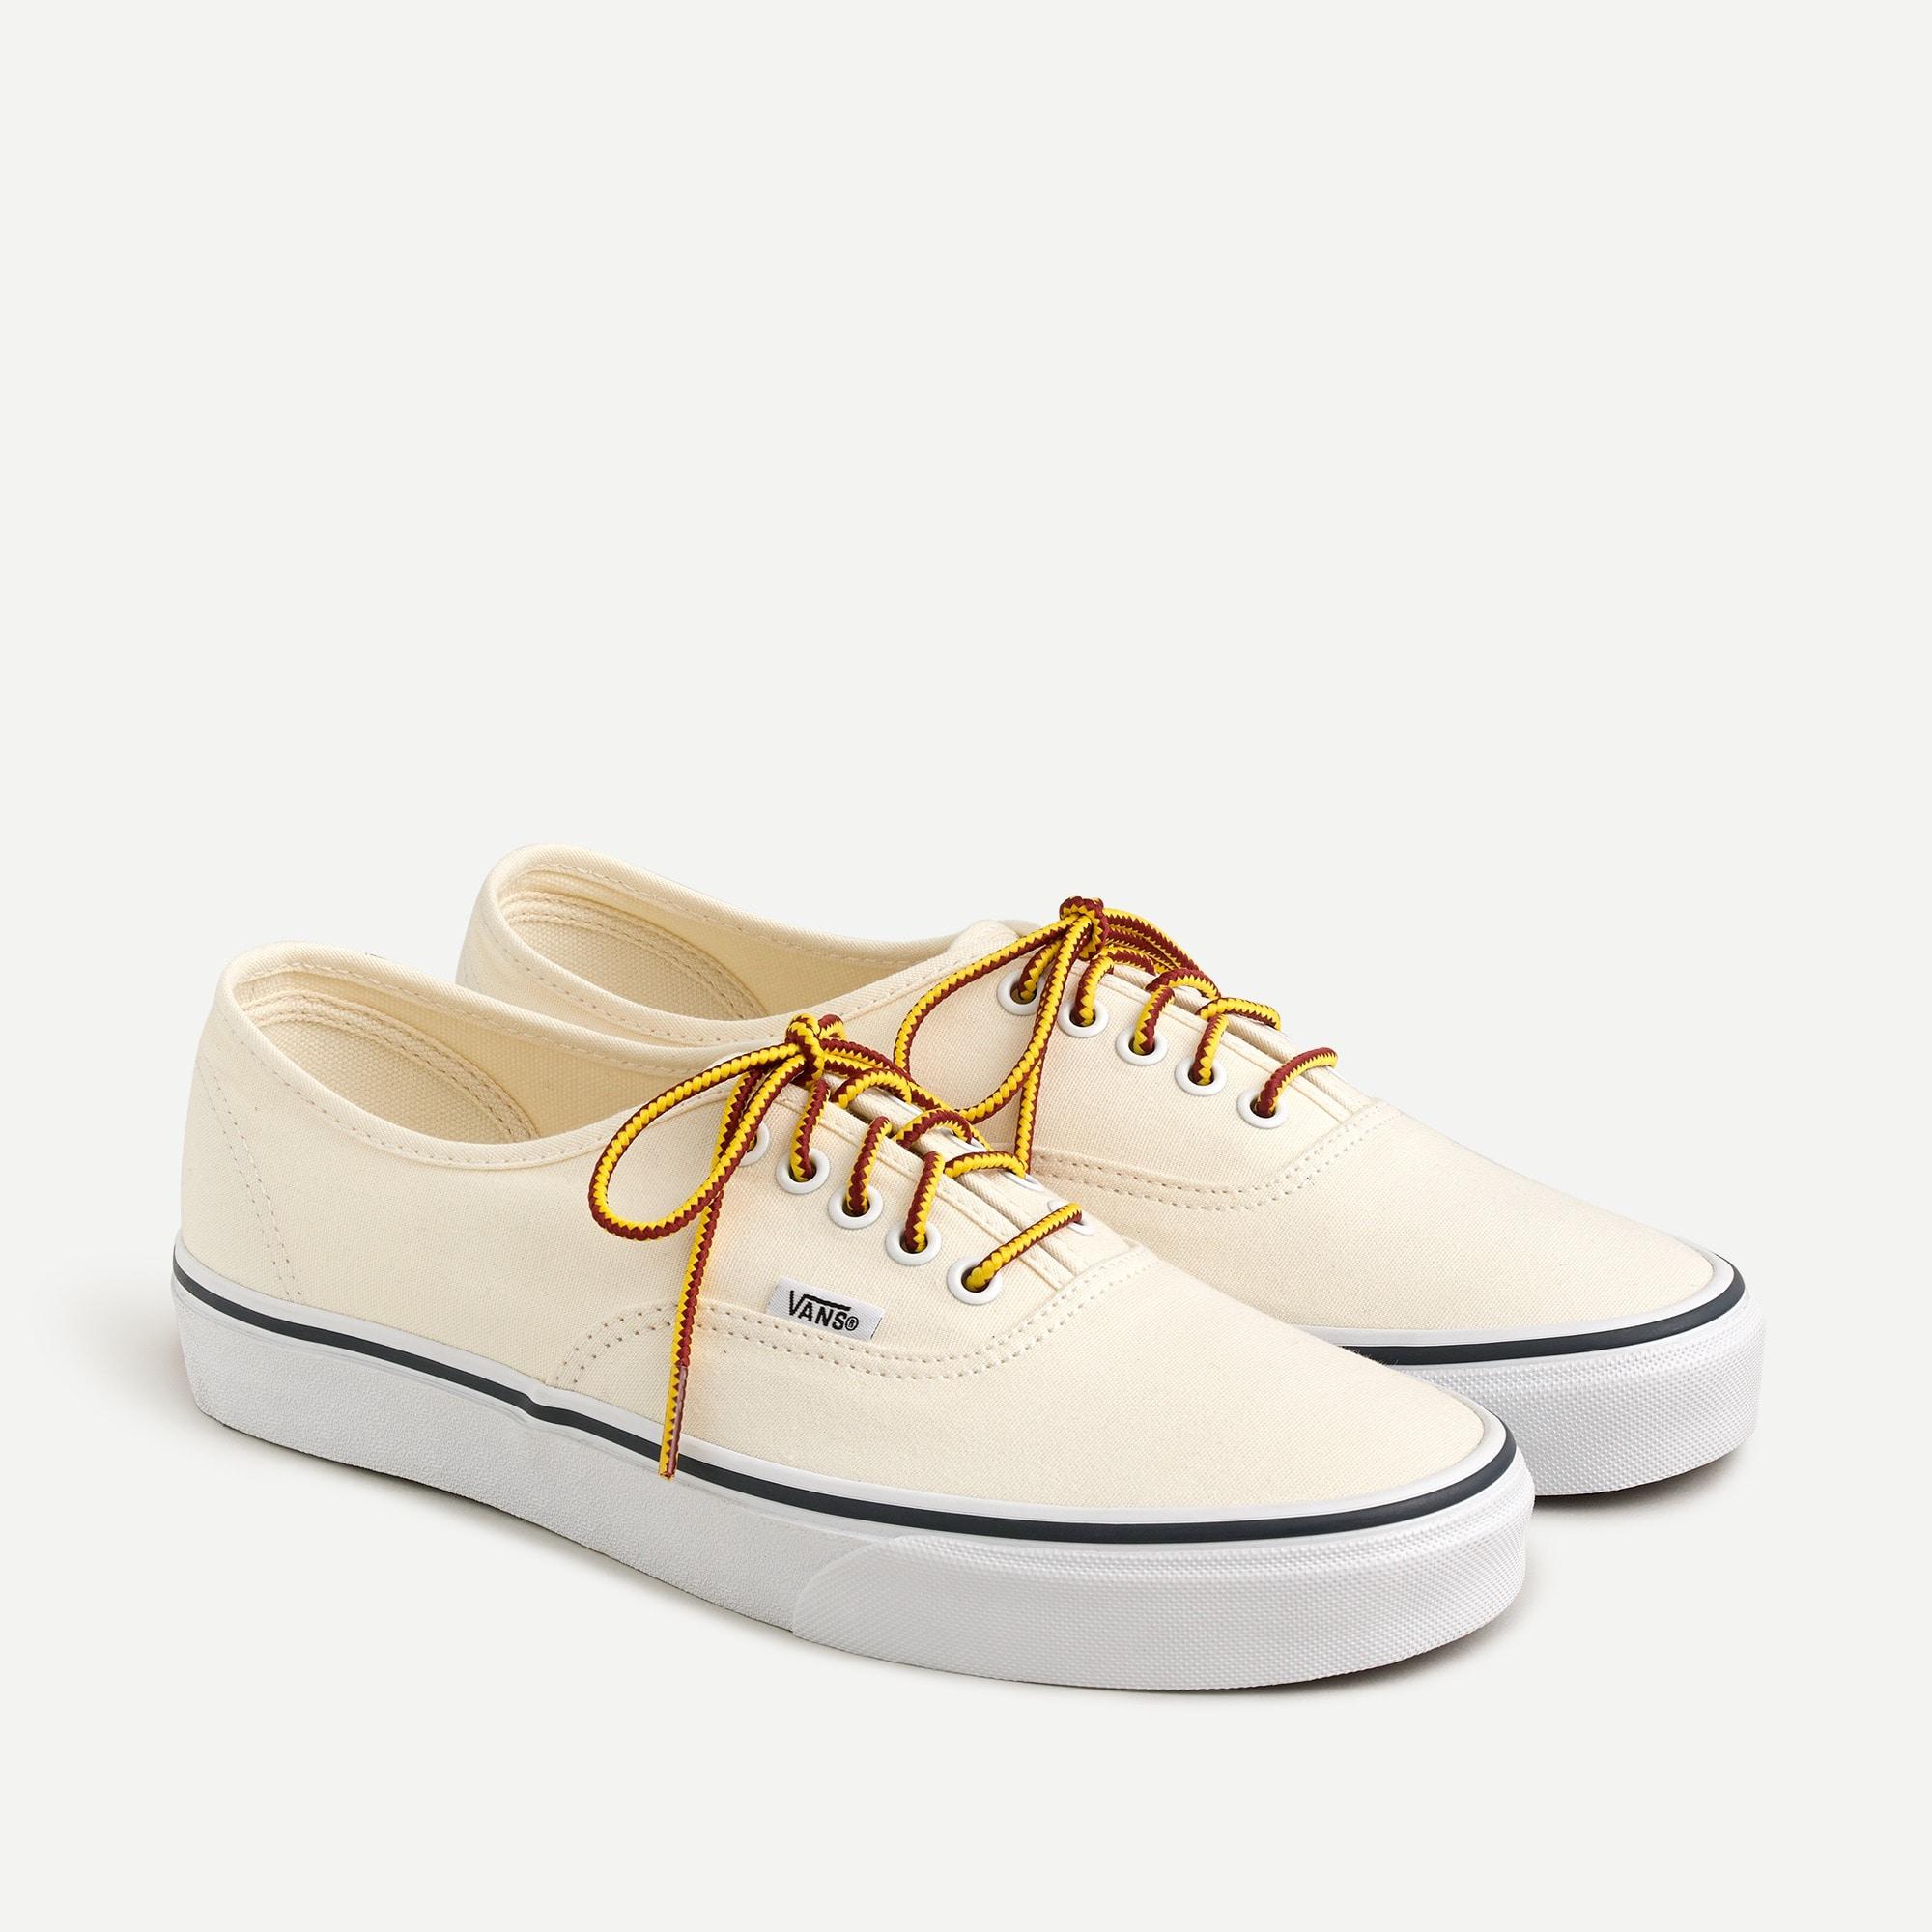 For J.crew Canvas Authentic Sneakers in 